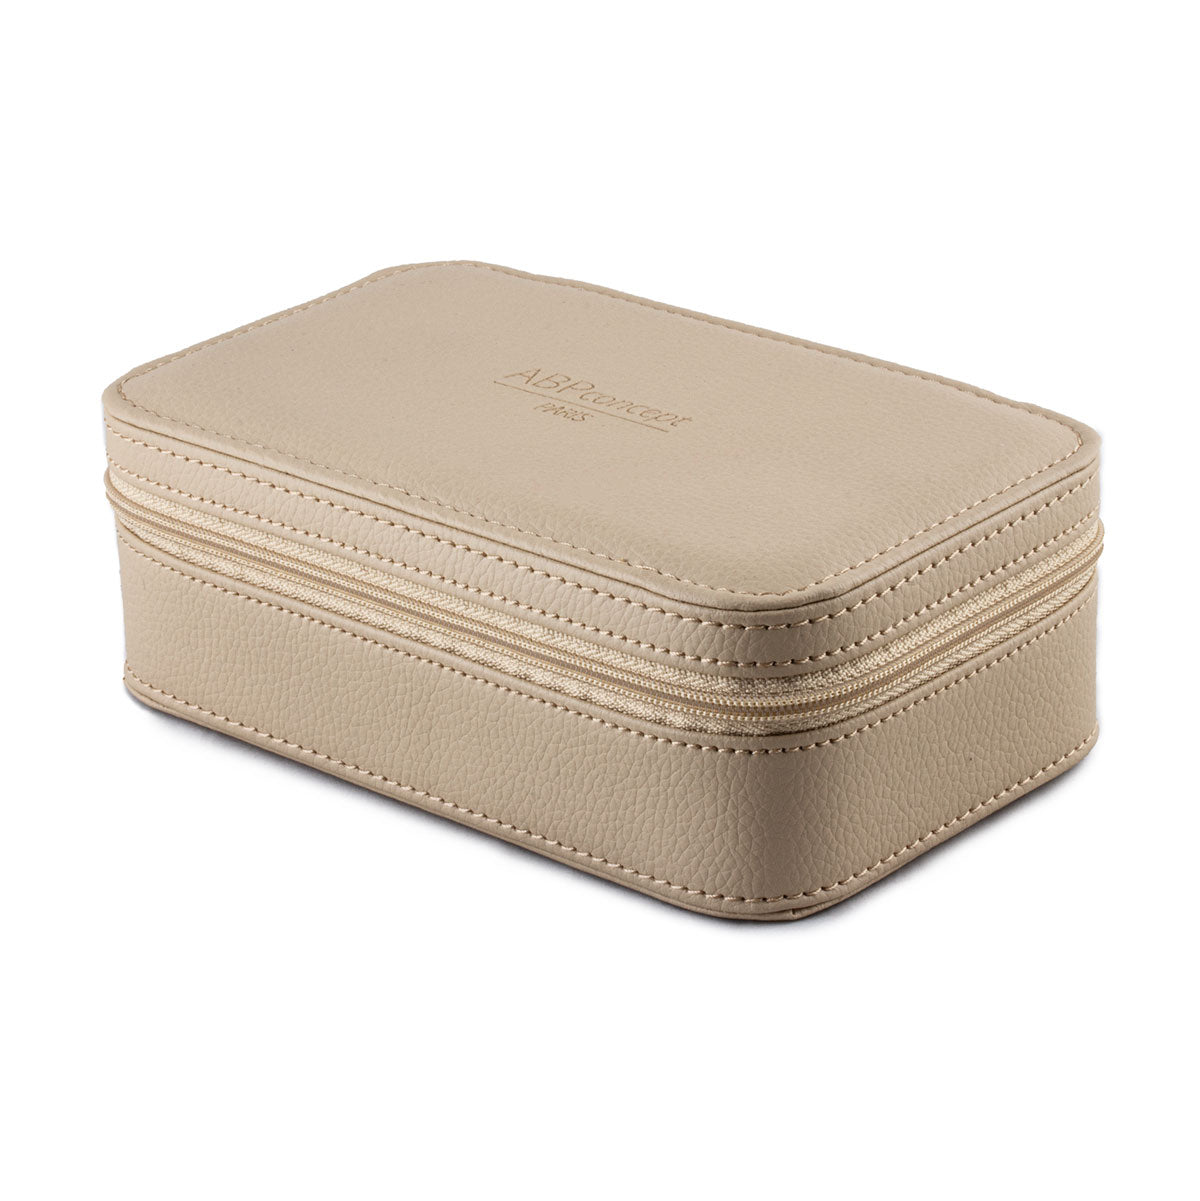 Watch and jewelry box "Milady" - Travel case for 1 watches - Beige / Black